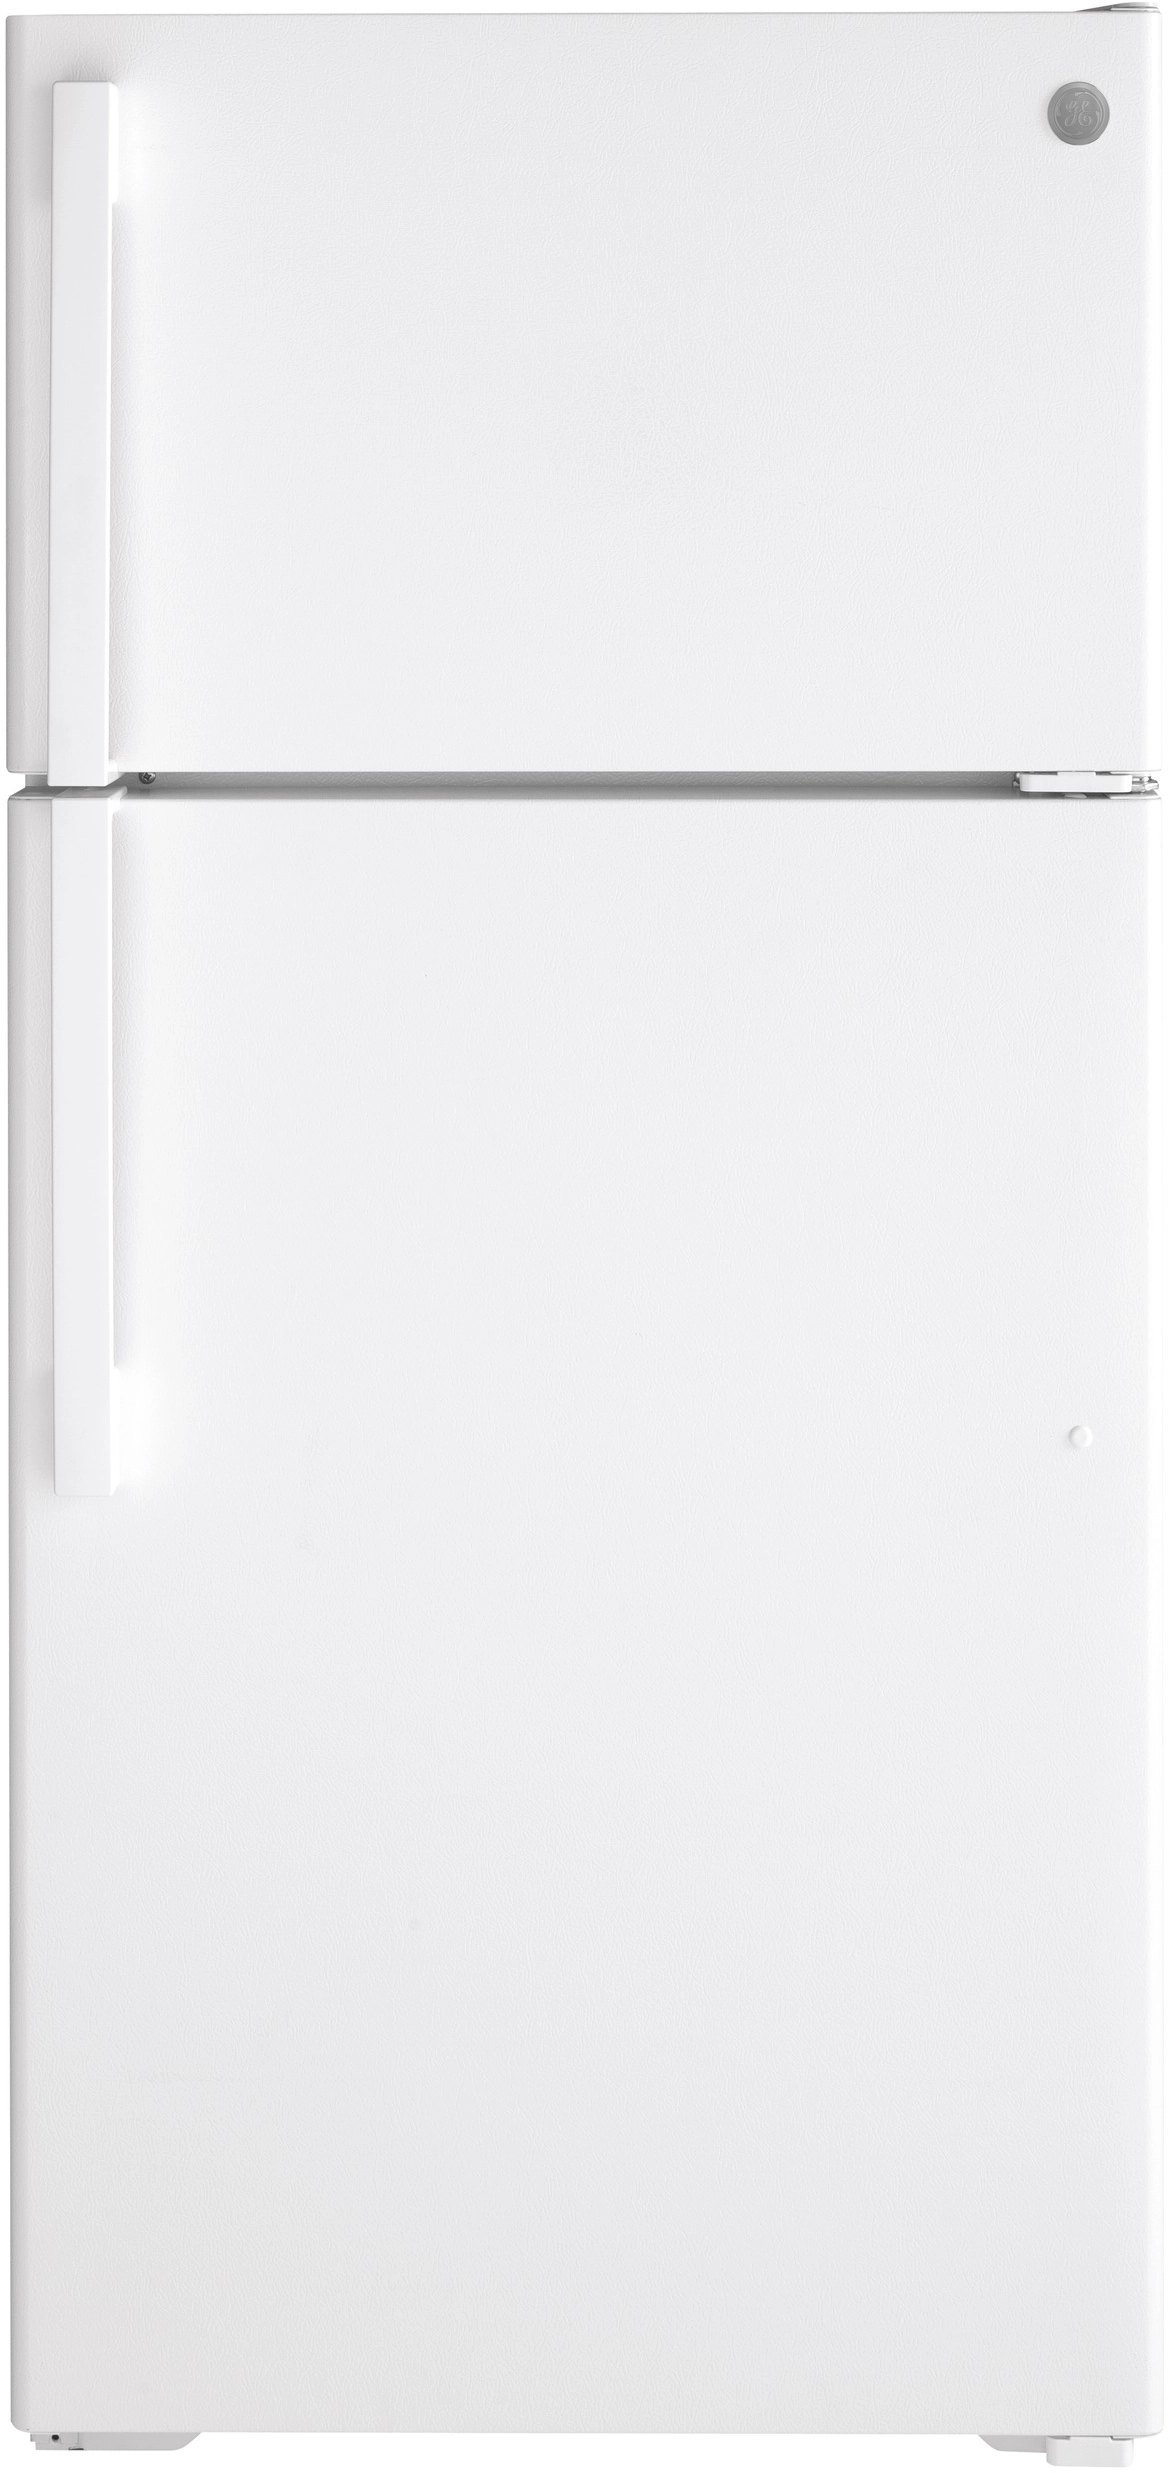 General Electric Top Freezer Refrigerator With Handle No Icemaker With Energy Star Energy 16 Cubic Feet Capacity Wire Shelves